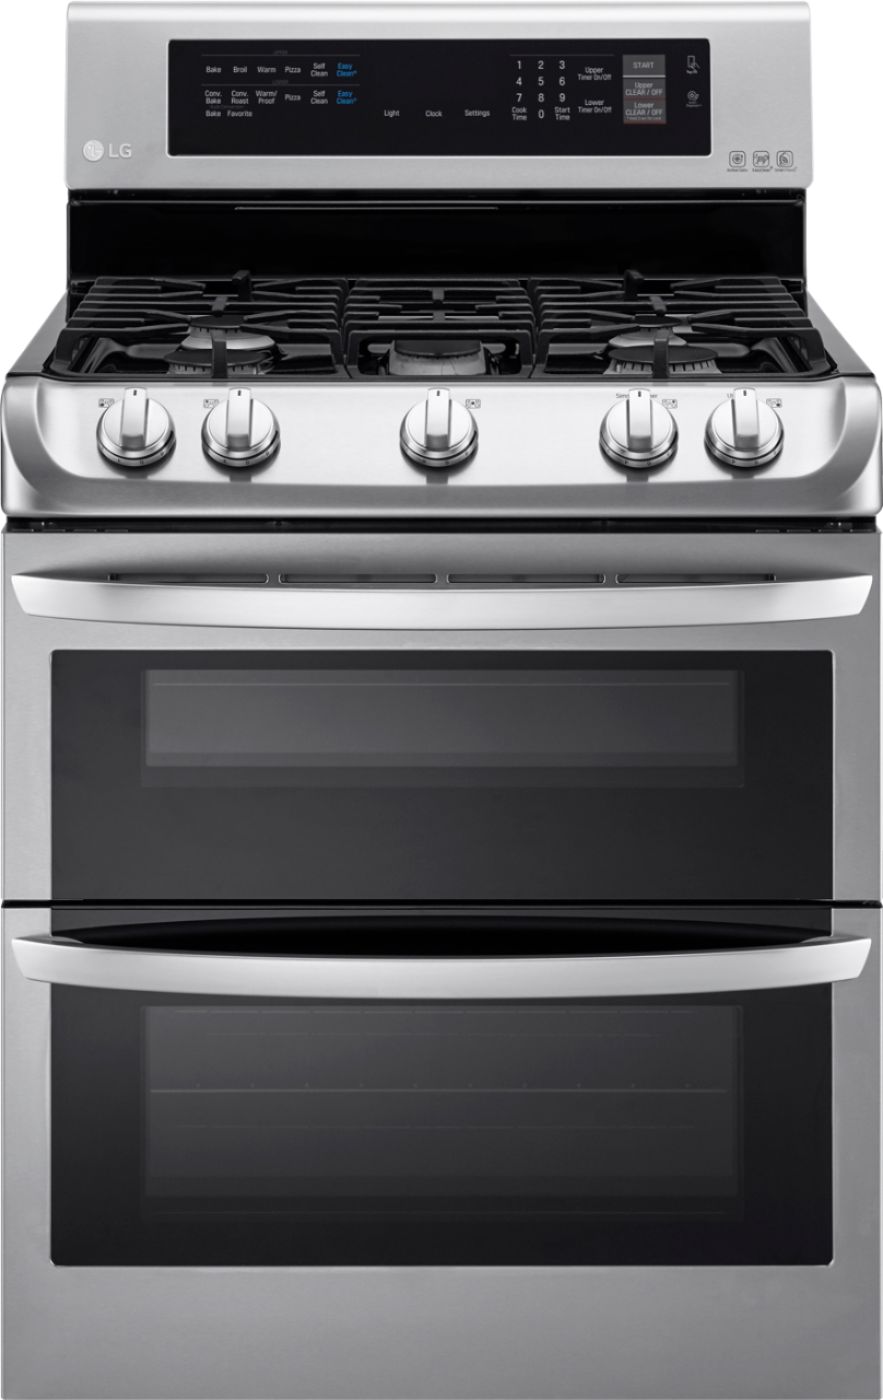 LG – 6.9 Cu. Ft. Self-Cleaning Freestanding Double Oven Gas Range with ProBake Convection – Stainless steel